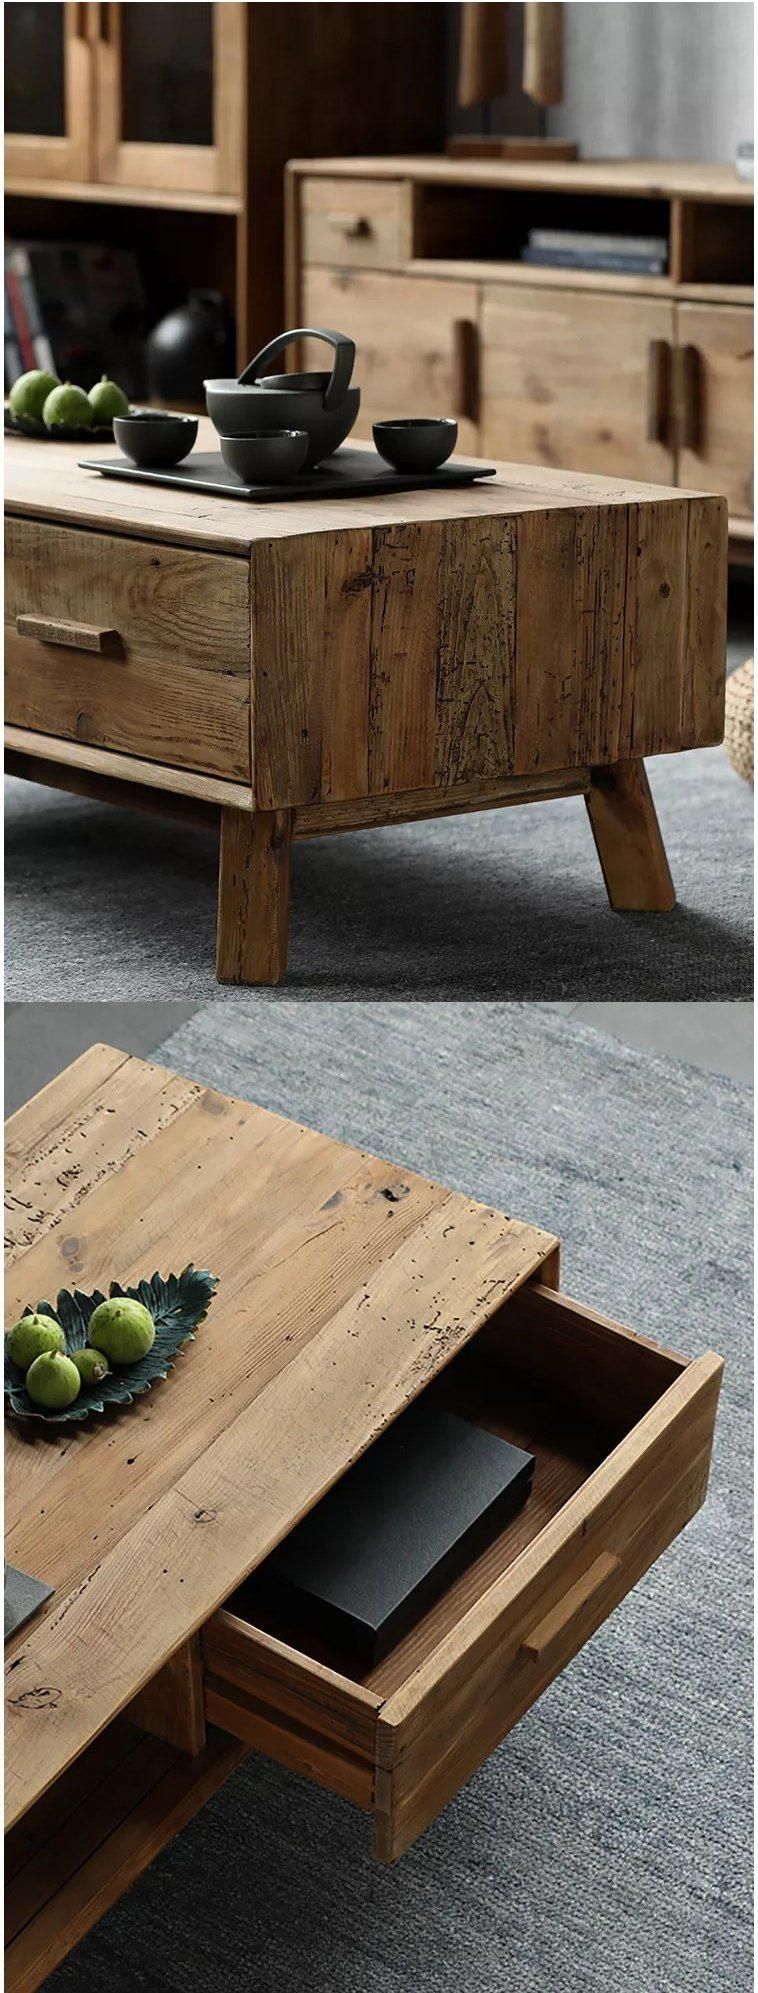 Furniture Wooden Furniture Cabinet Modern Furniture Home Furniture Living Room Furniture Multi-Function Antique Rustic Reclaimed Wood Coffee Table